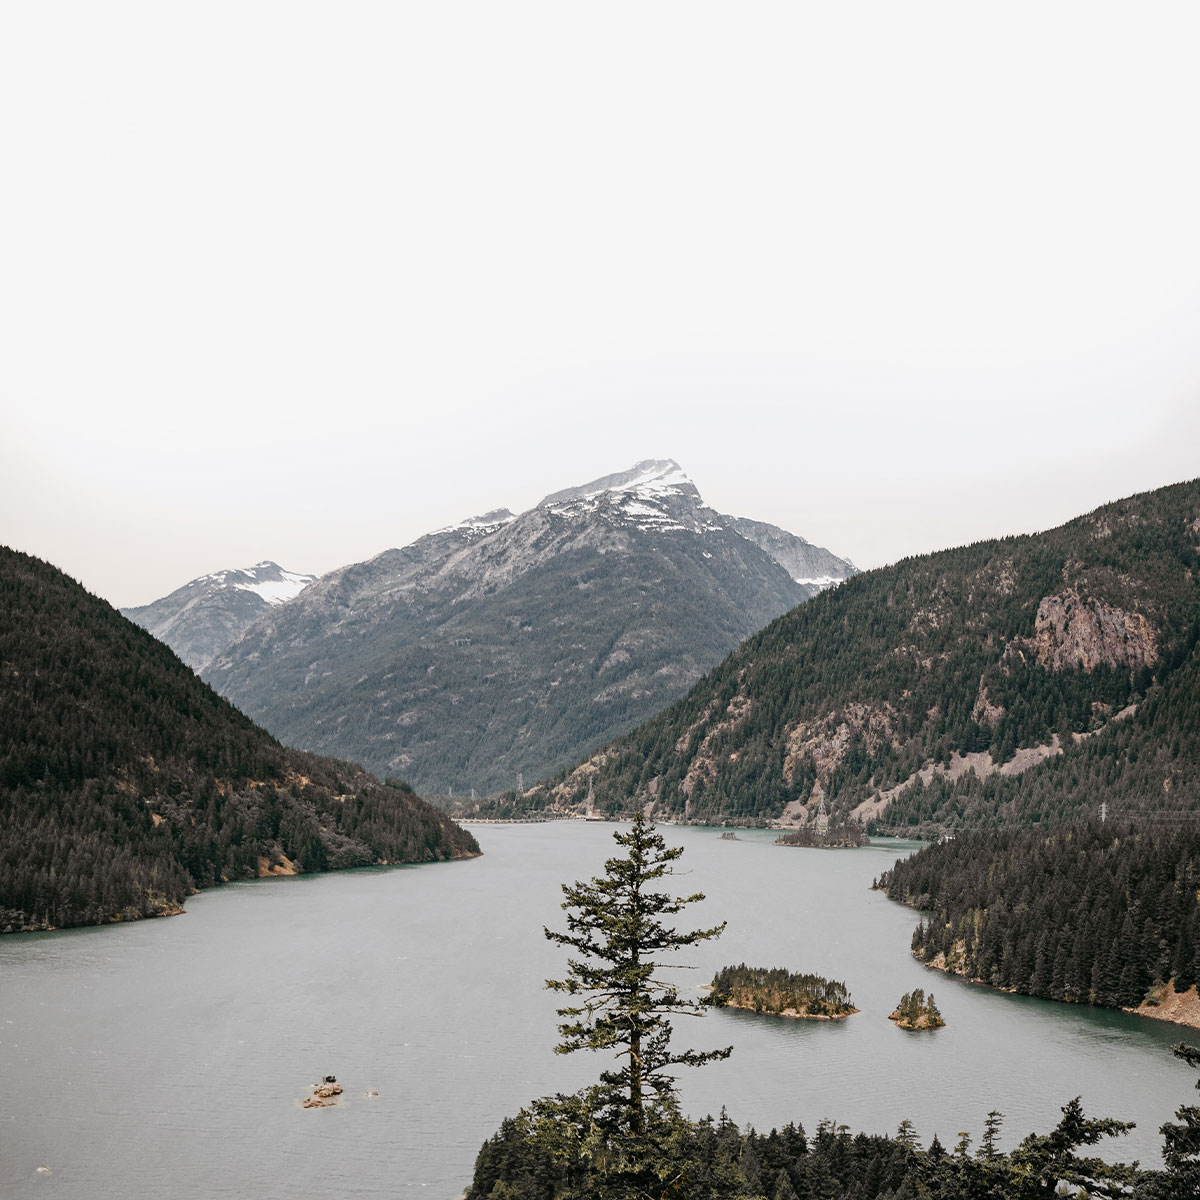 View from Diablo Lake Overlook in North Cascades National Park